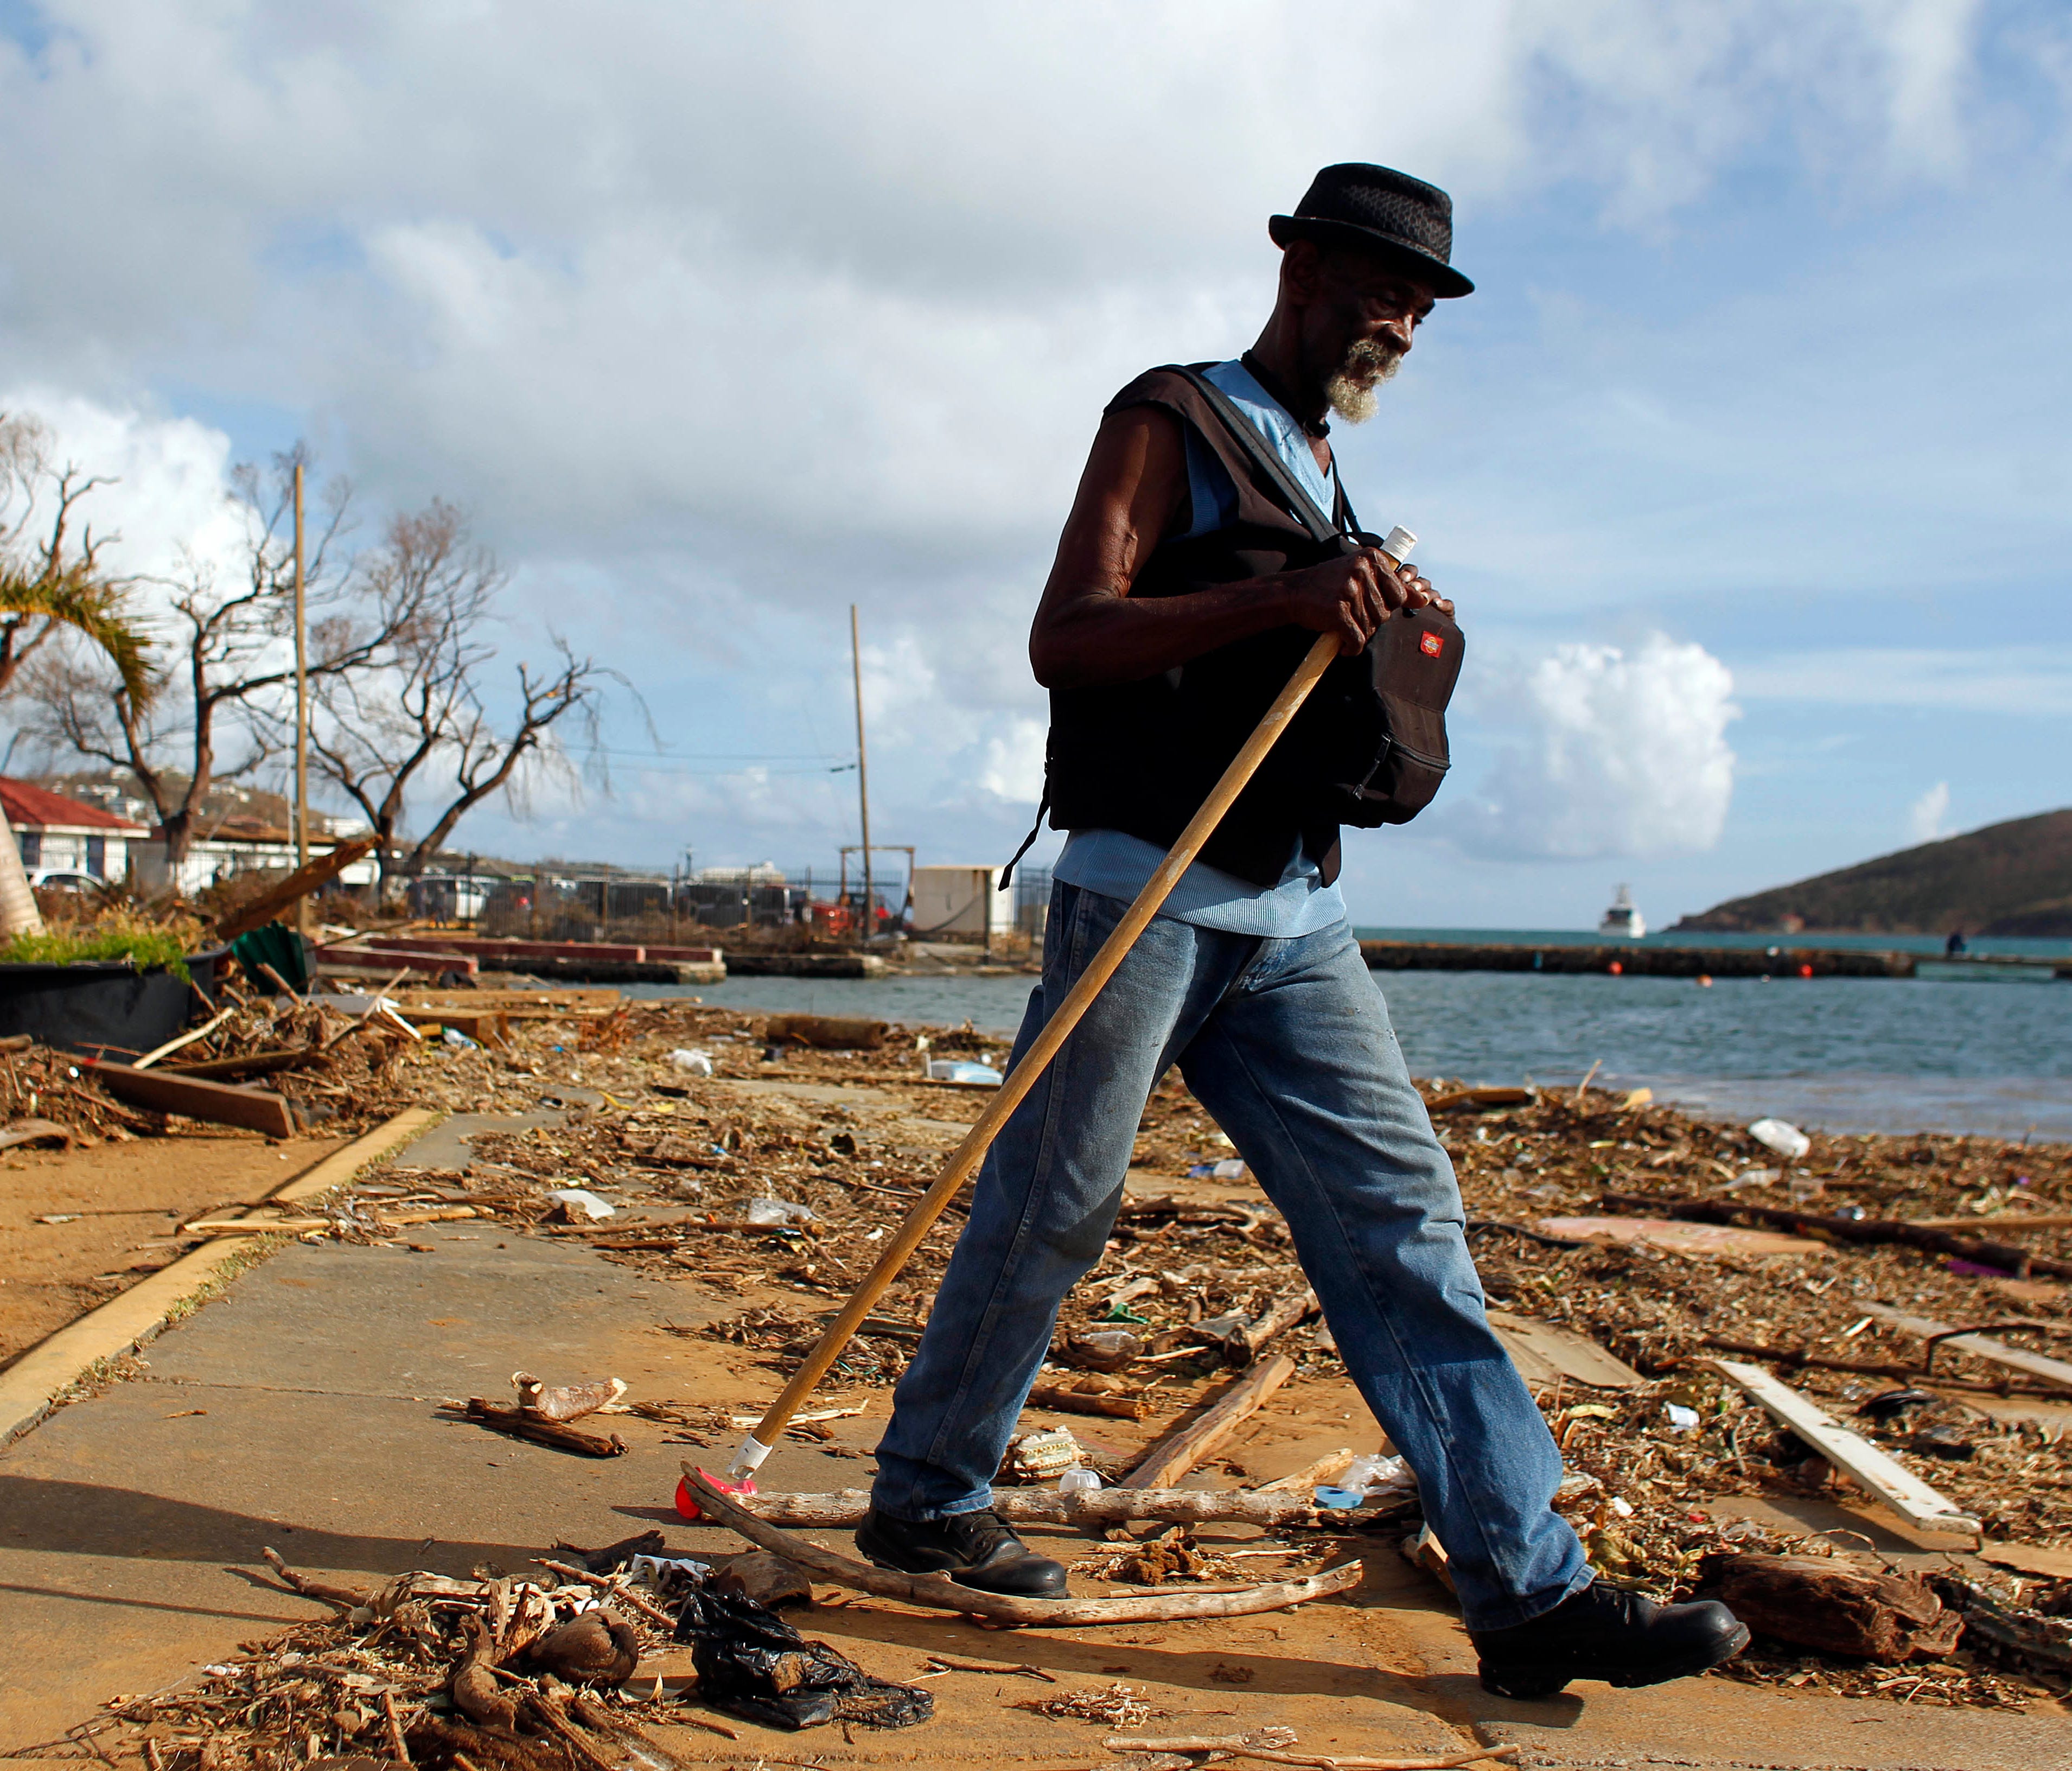 A man walks past debris caused by Hurricane Irma in Charlotte Amalie, St. Thomas, U.S. Virgin Islands, on Sept. 10, 2017.  The storm ravaged such lush resort islands as St. Martin, St. Barts, St. Thomas, Barbuda and Anguilla.